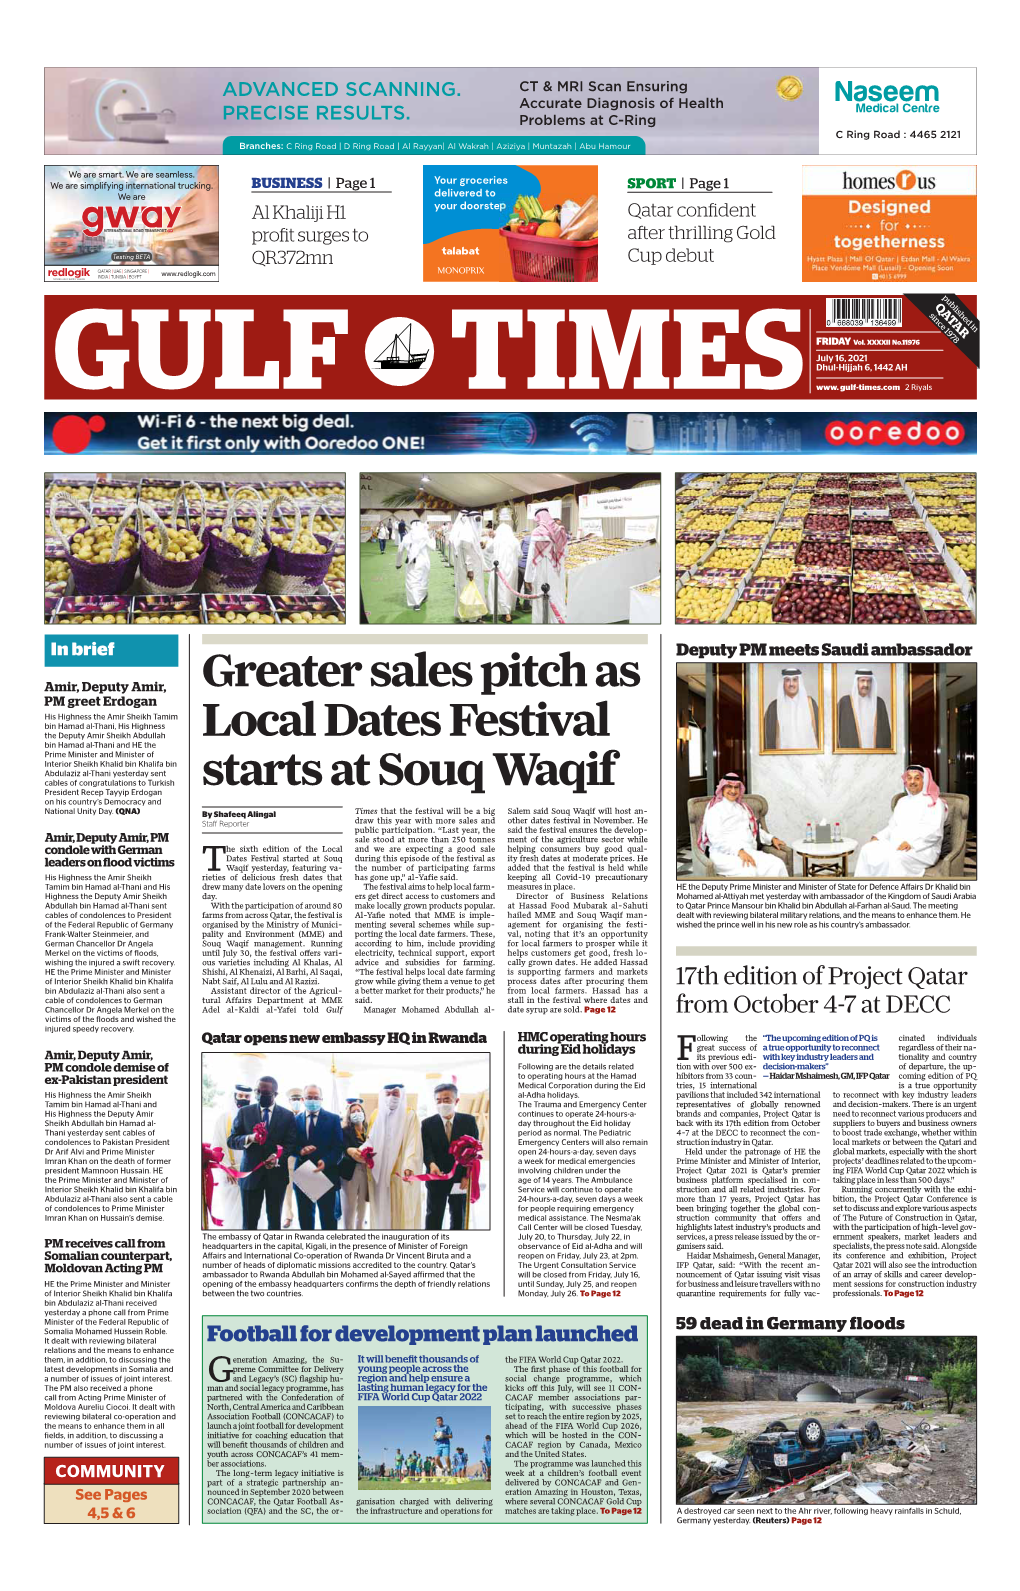 Greater Sales Pitch As Local Dates Festival Starts at Souq Waqif